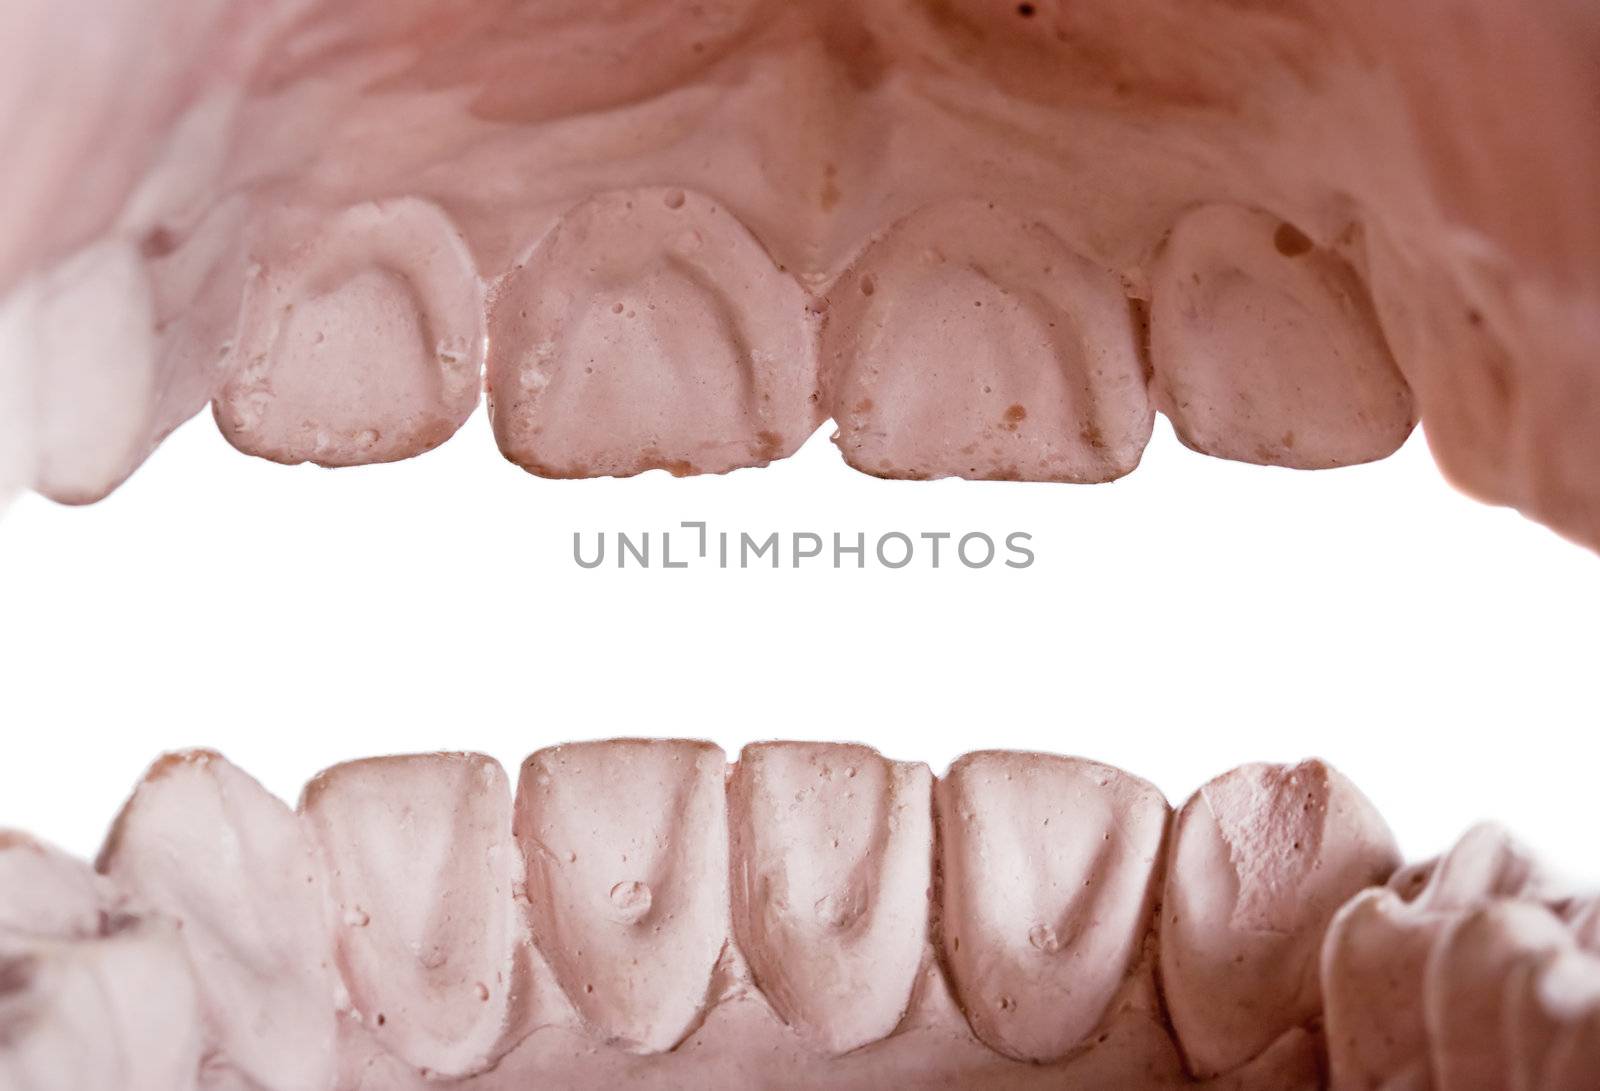 gypsum model of a human teeth on white background